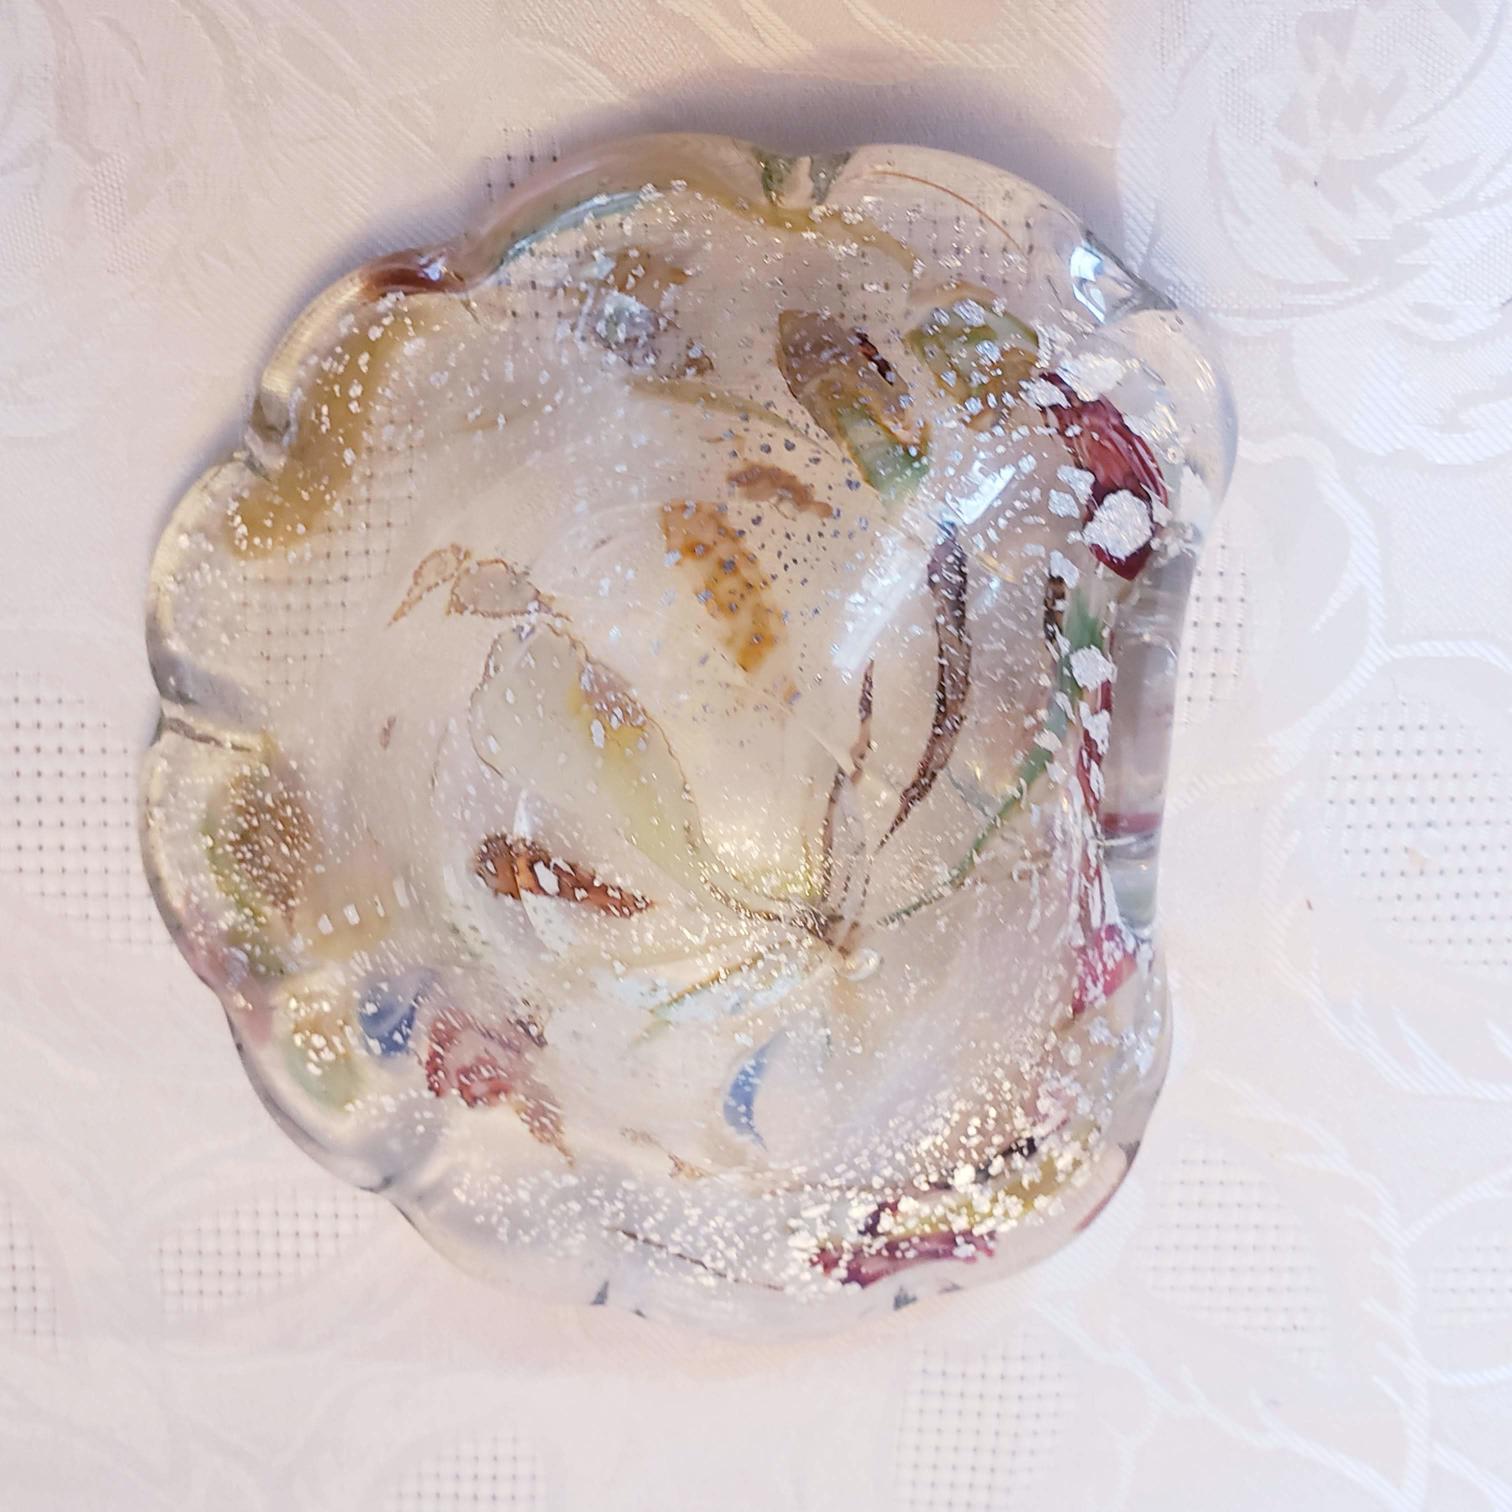 https://serstyle.com/wp-content/uploads/2019/06/Art-Glass-Gold-Silver-Flakes-Candy-Dish-13.jpg